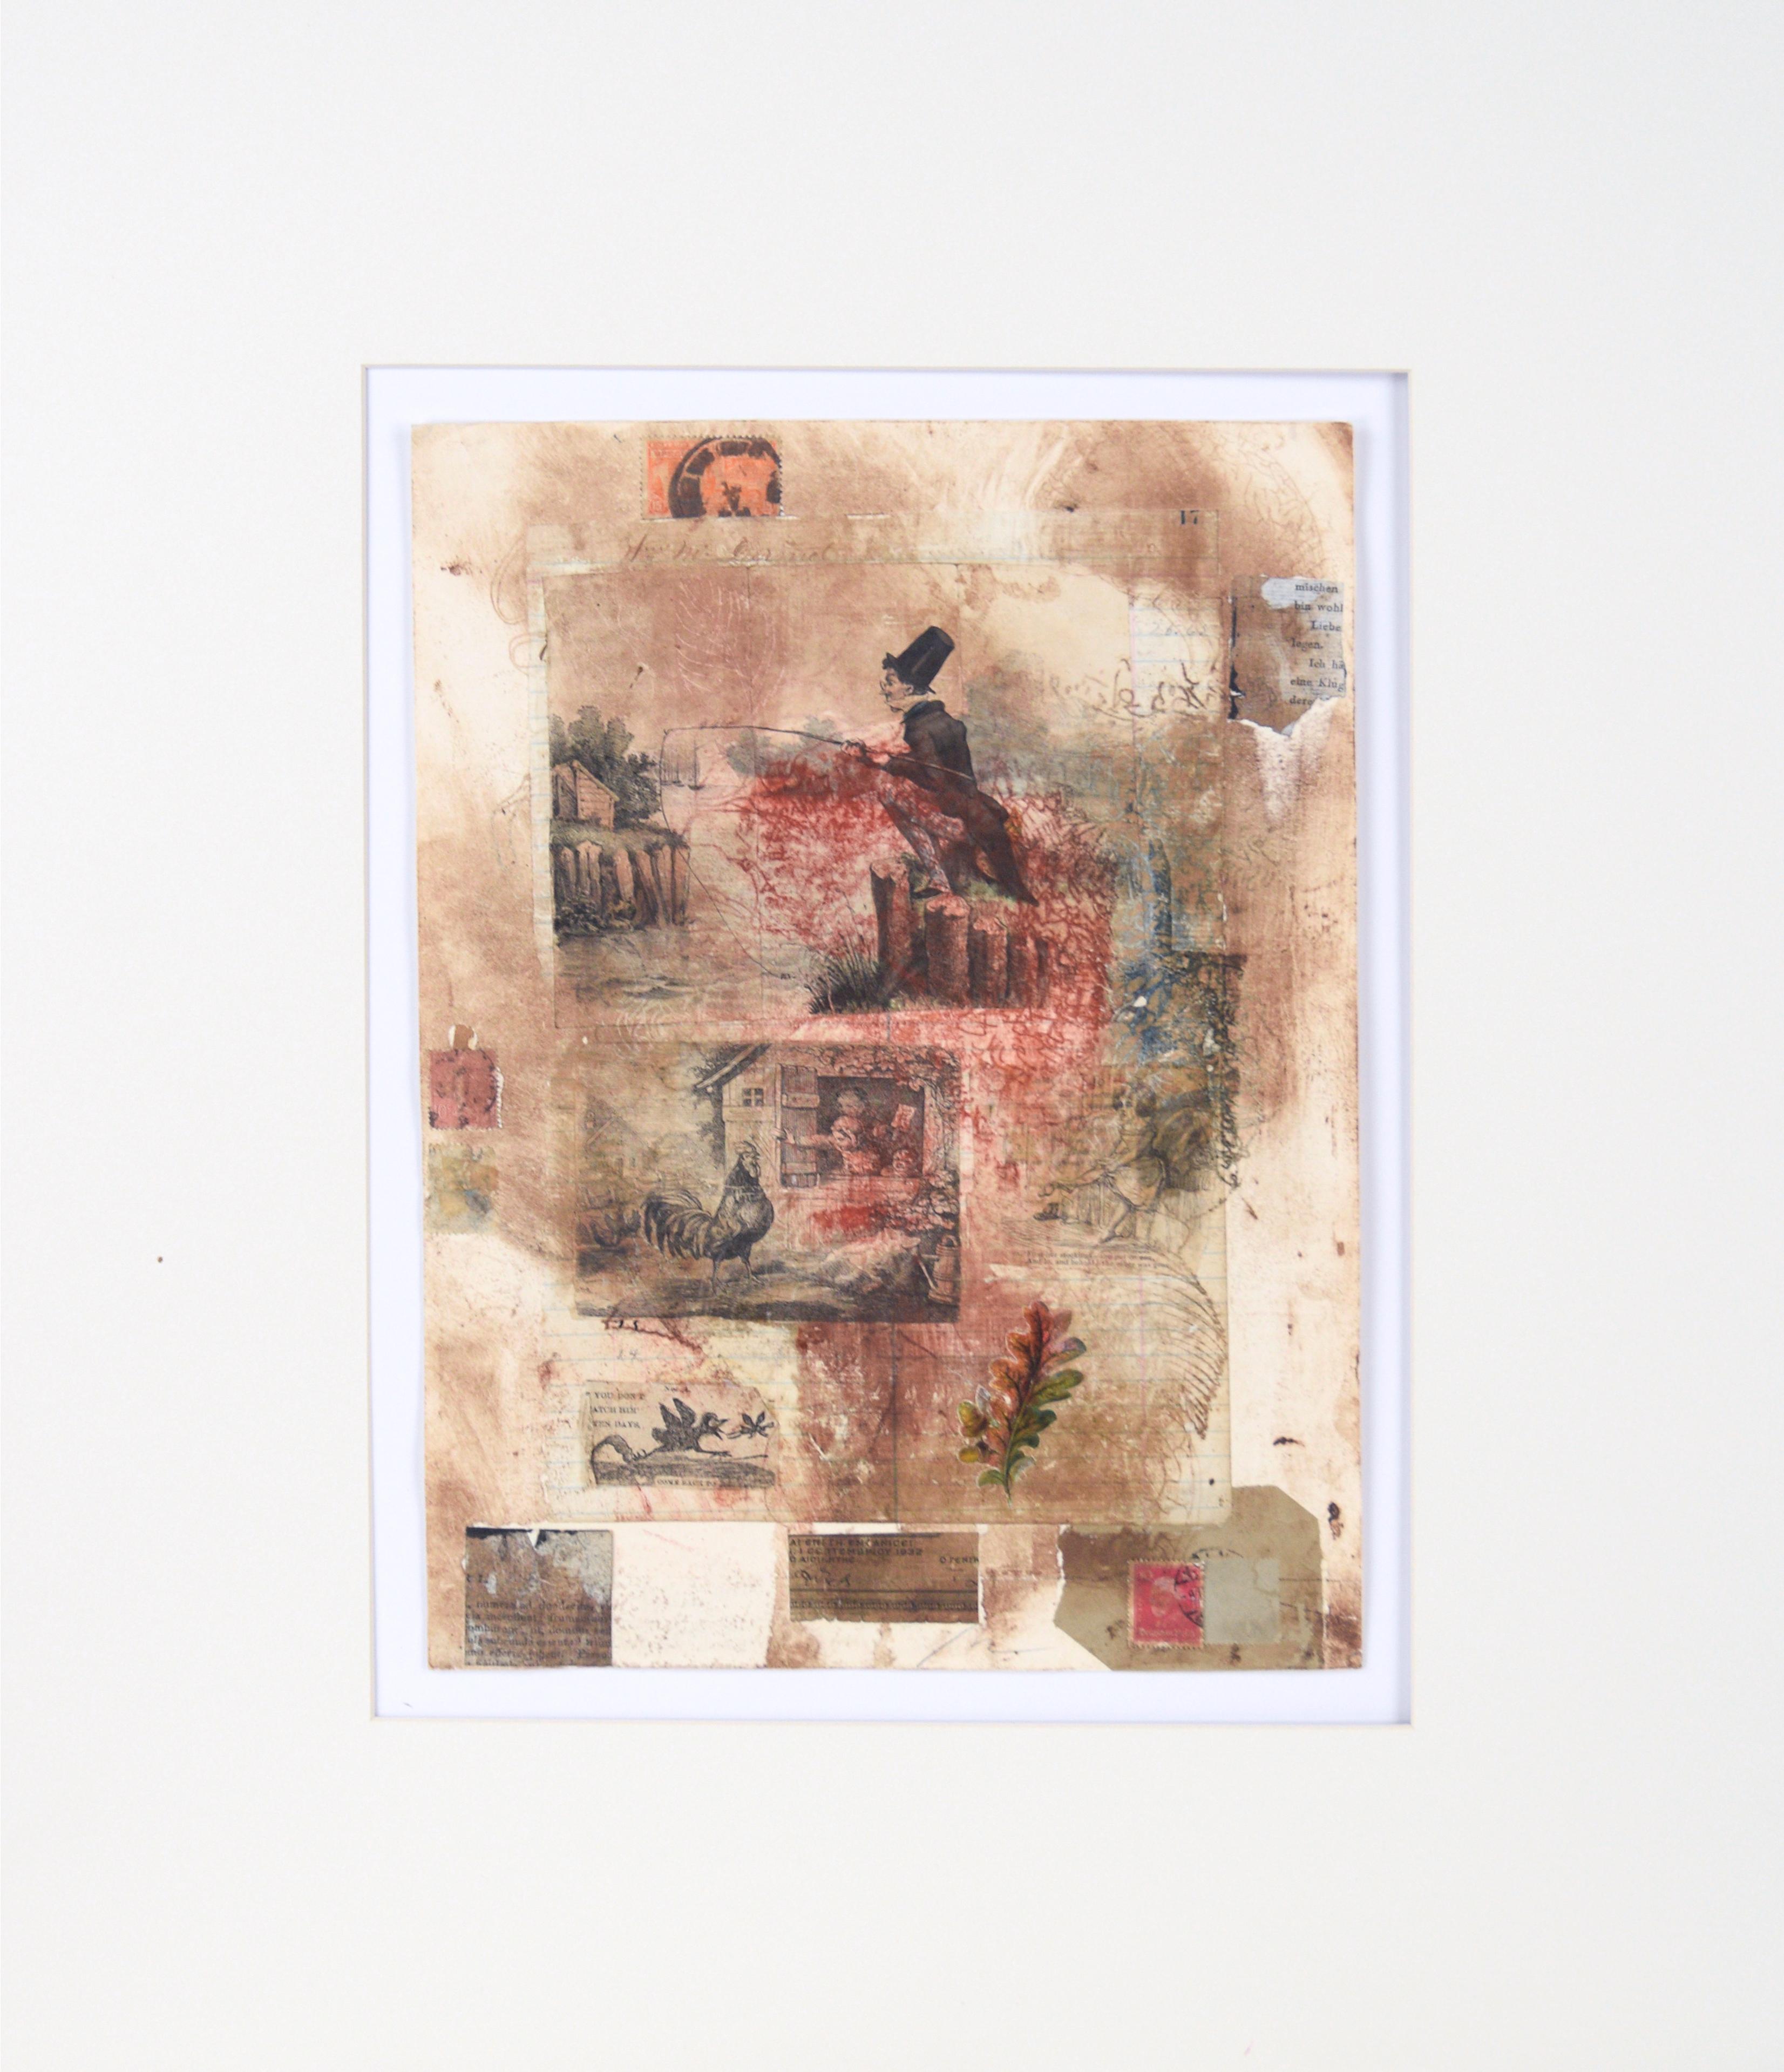 Michael Pauker  Abstract Painting - "Mischen Bin Wohl" - Chine Colle Monoprint with Collage